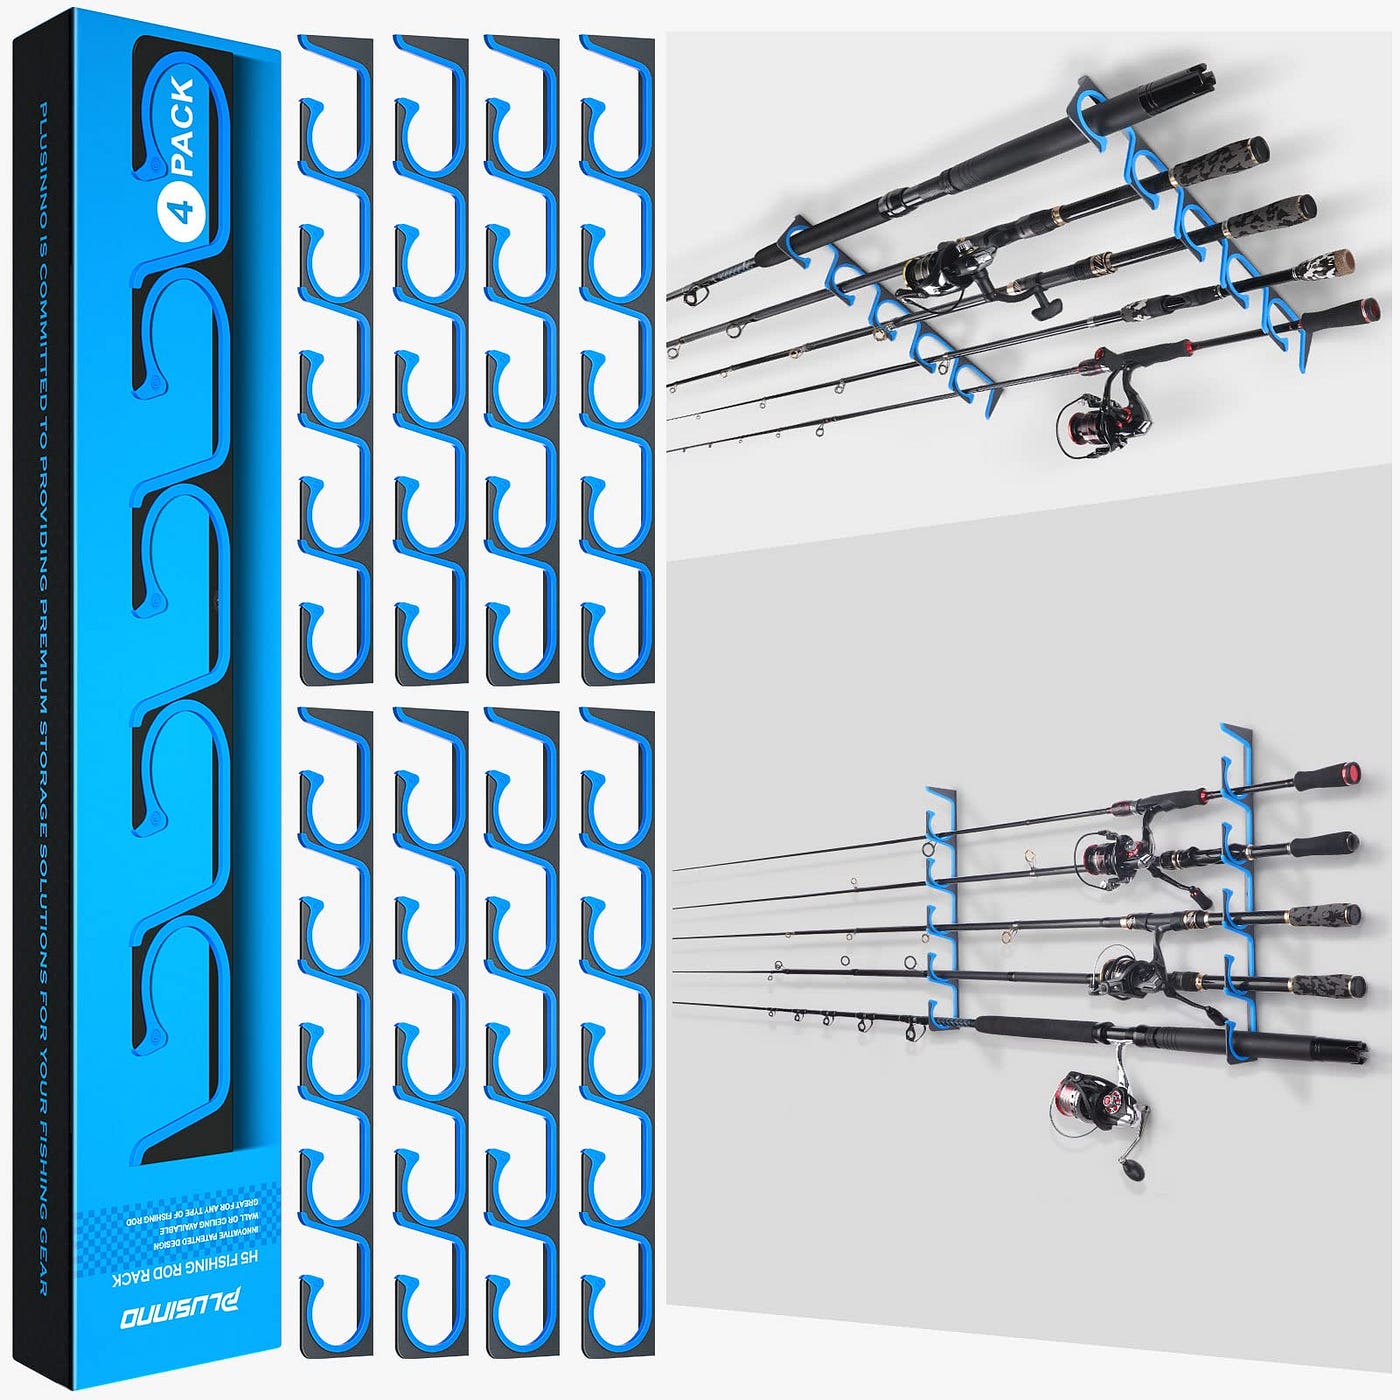 5 DIY Fishing Rod Rack Wall Ideas for Your Home